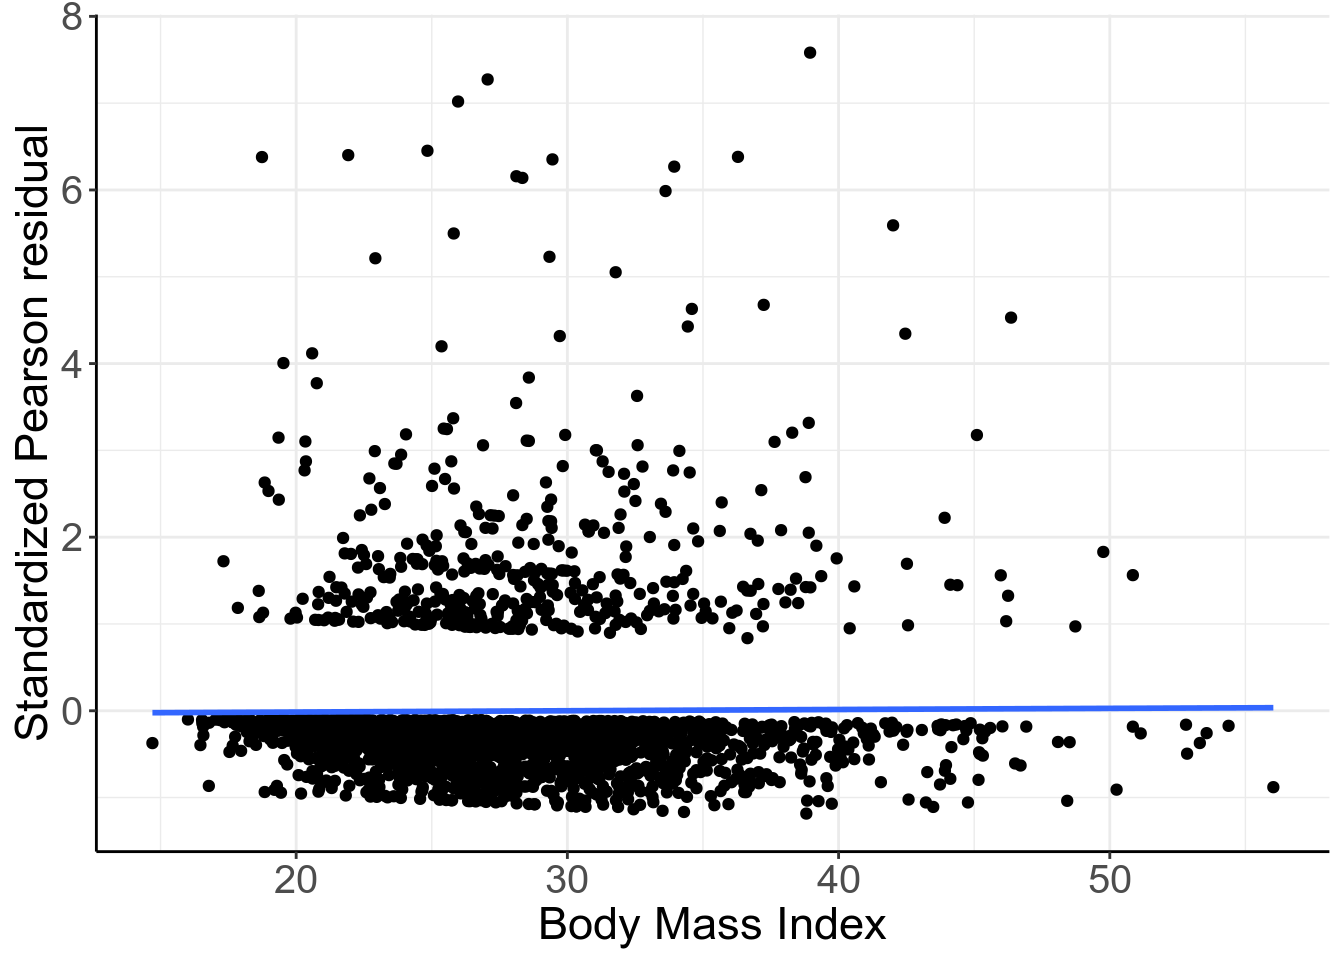 Standardized Pearson residuals vs. BMI. Logistic mdoel with **linear and quadratic age and BMI** as covariates.